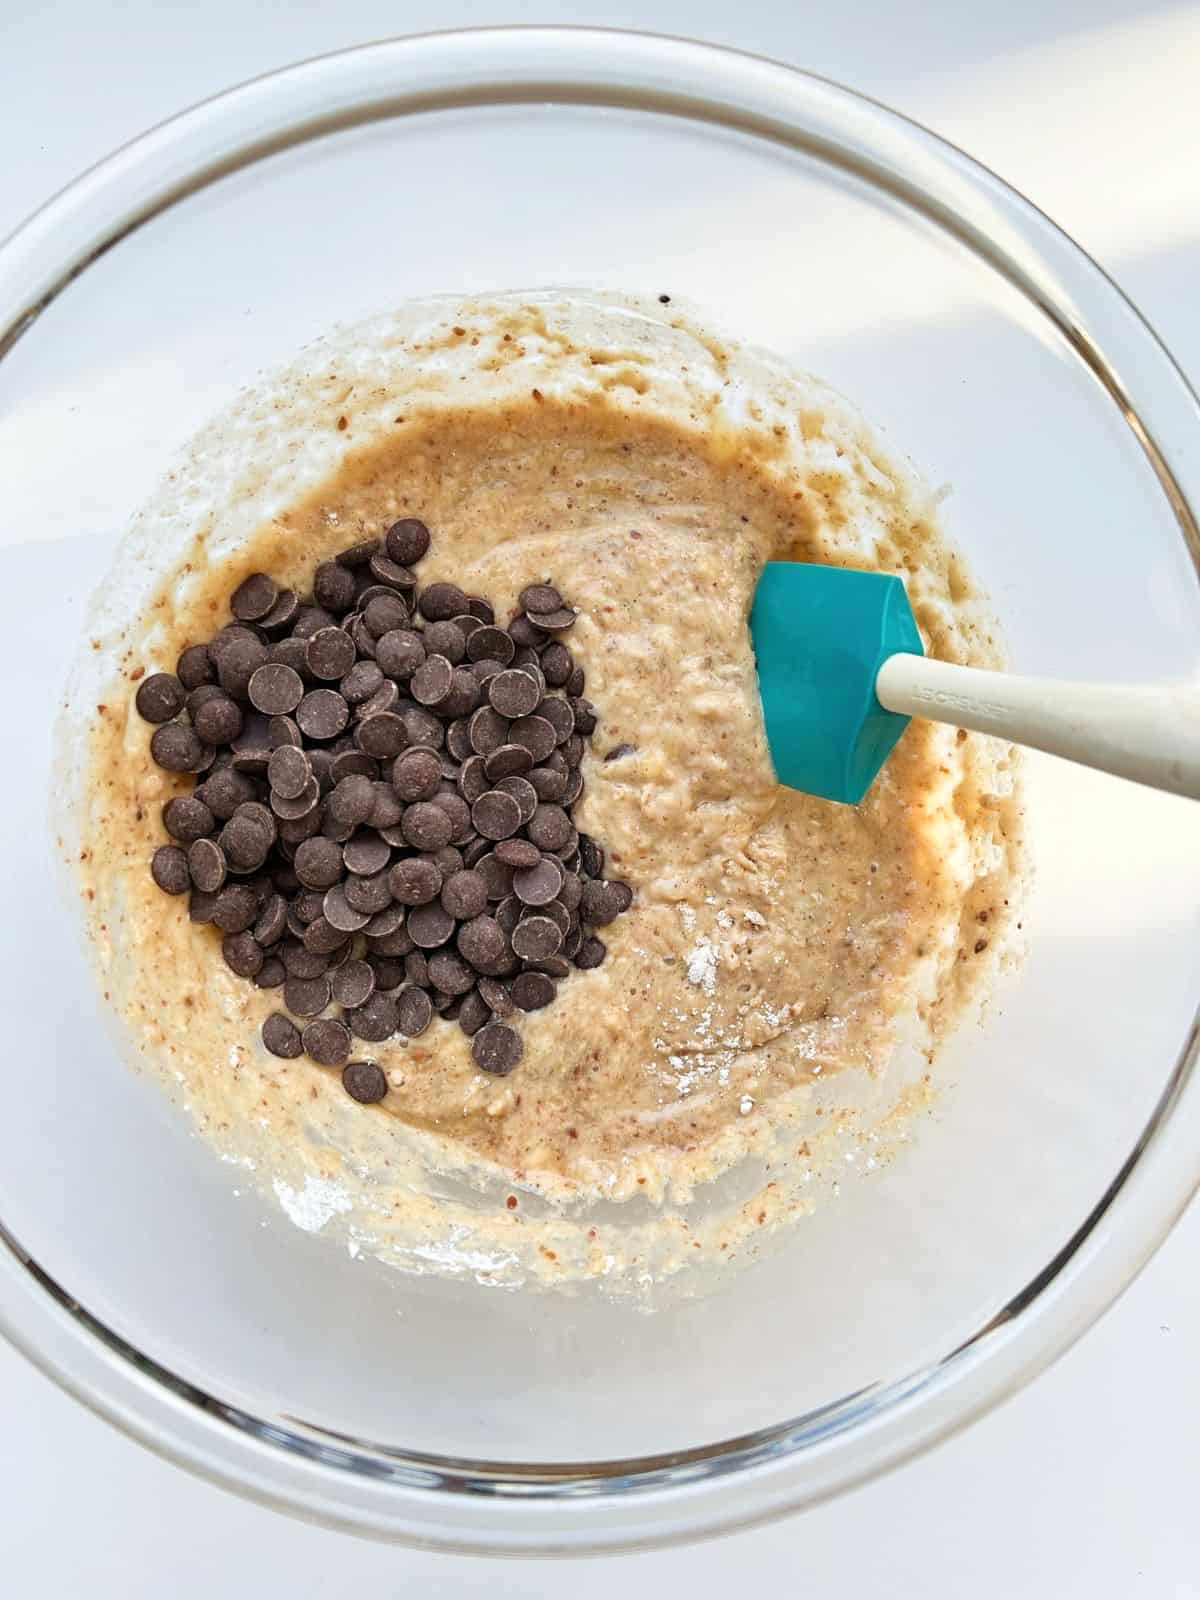 An image of the whisked mix for the banana bread in a glass bowl, with chocolate chips sitting on top.